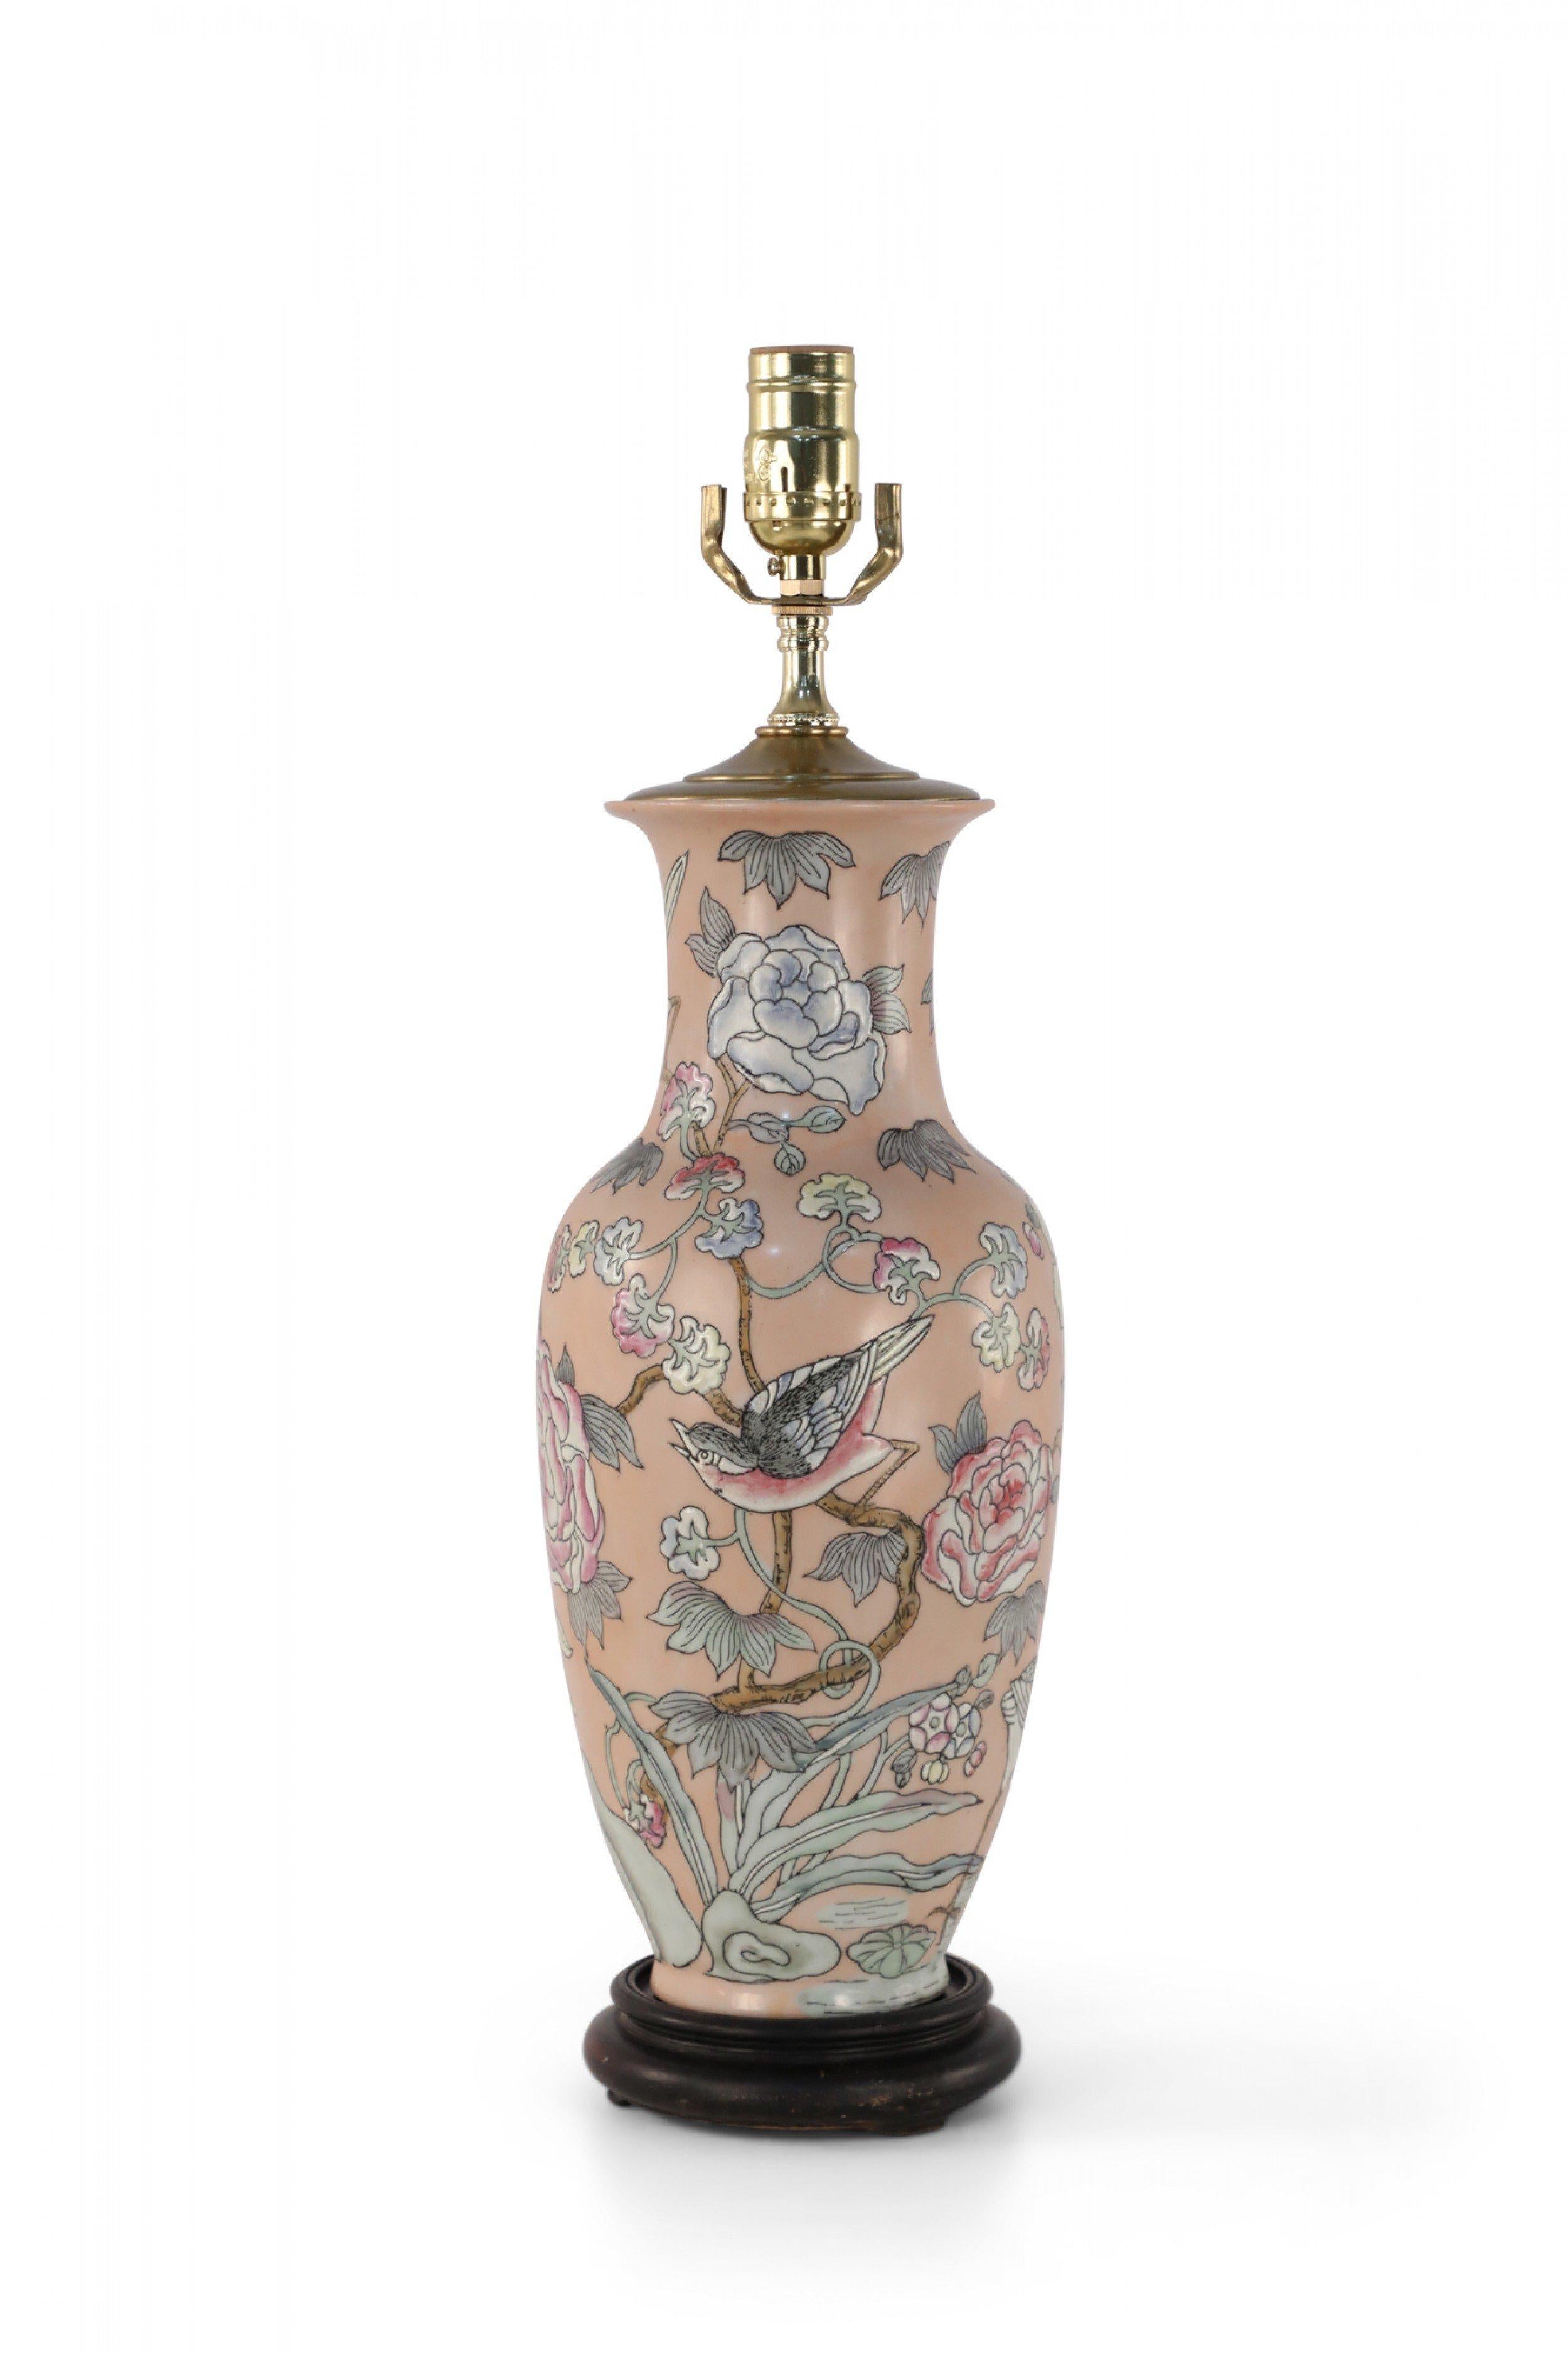 Chinese pink porcelain table lamp made from a baluster-shaped vase decorated with cranes and sparrows in natural surroundings emphasized with linework and lightly colored florals, on a wooden base with brass hardware.
       